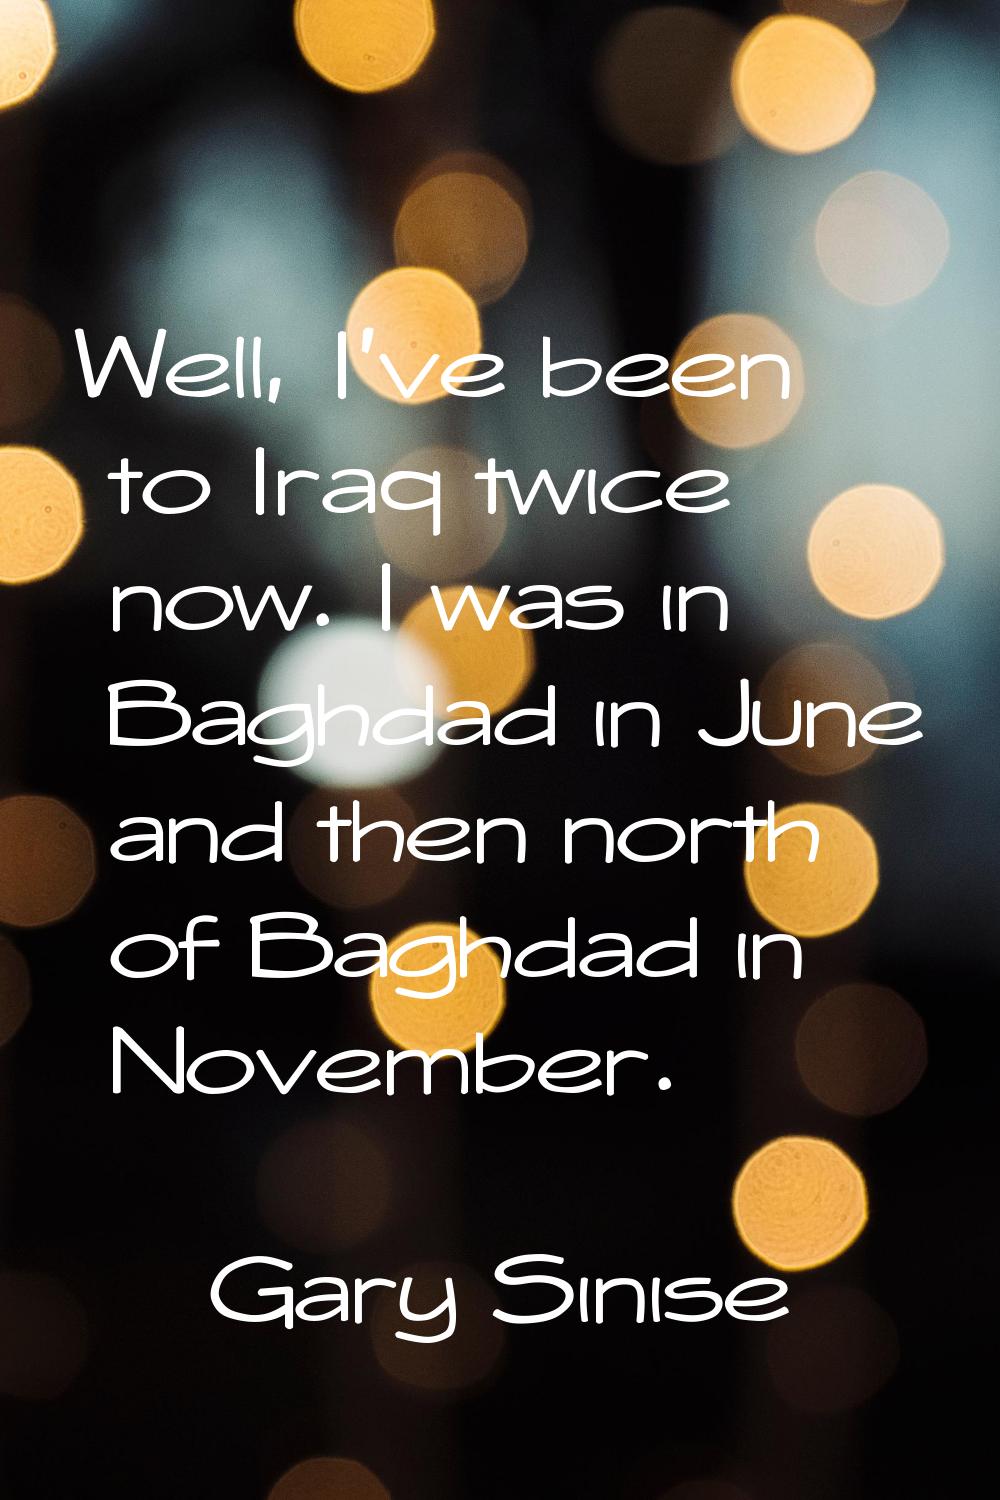 Well, I've been to Iraq twice now. I was in Baghdad in June and then north of Baghdad in November.